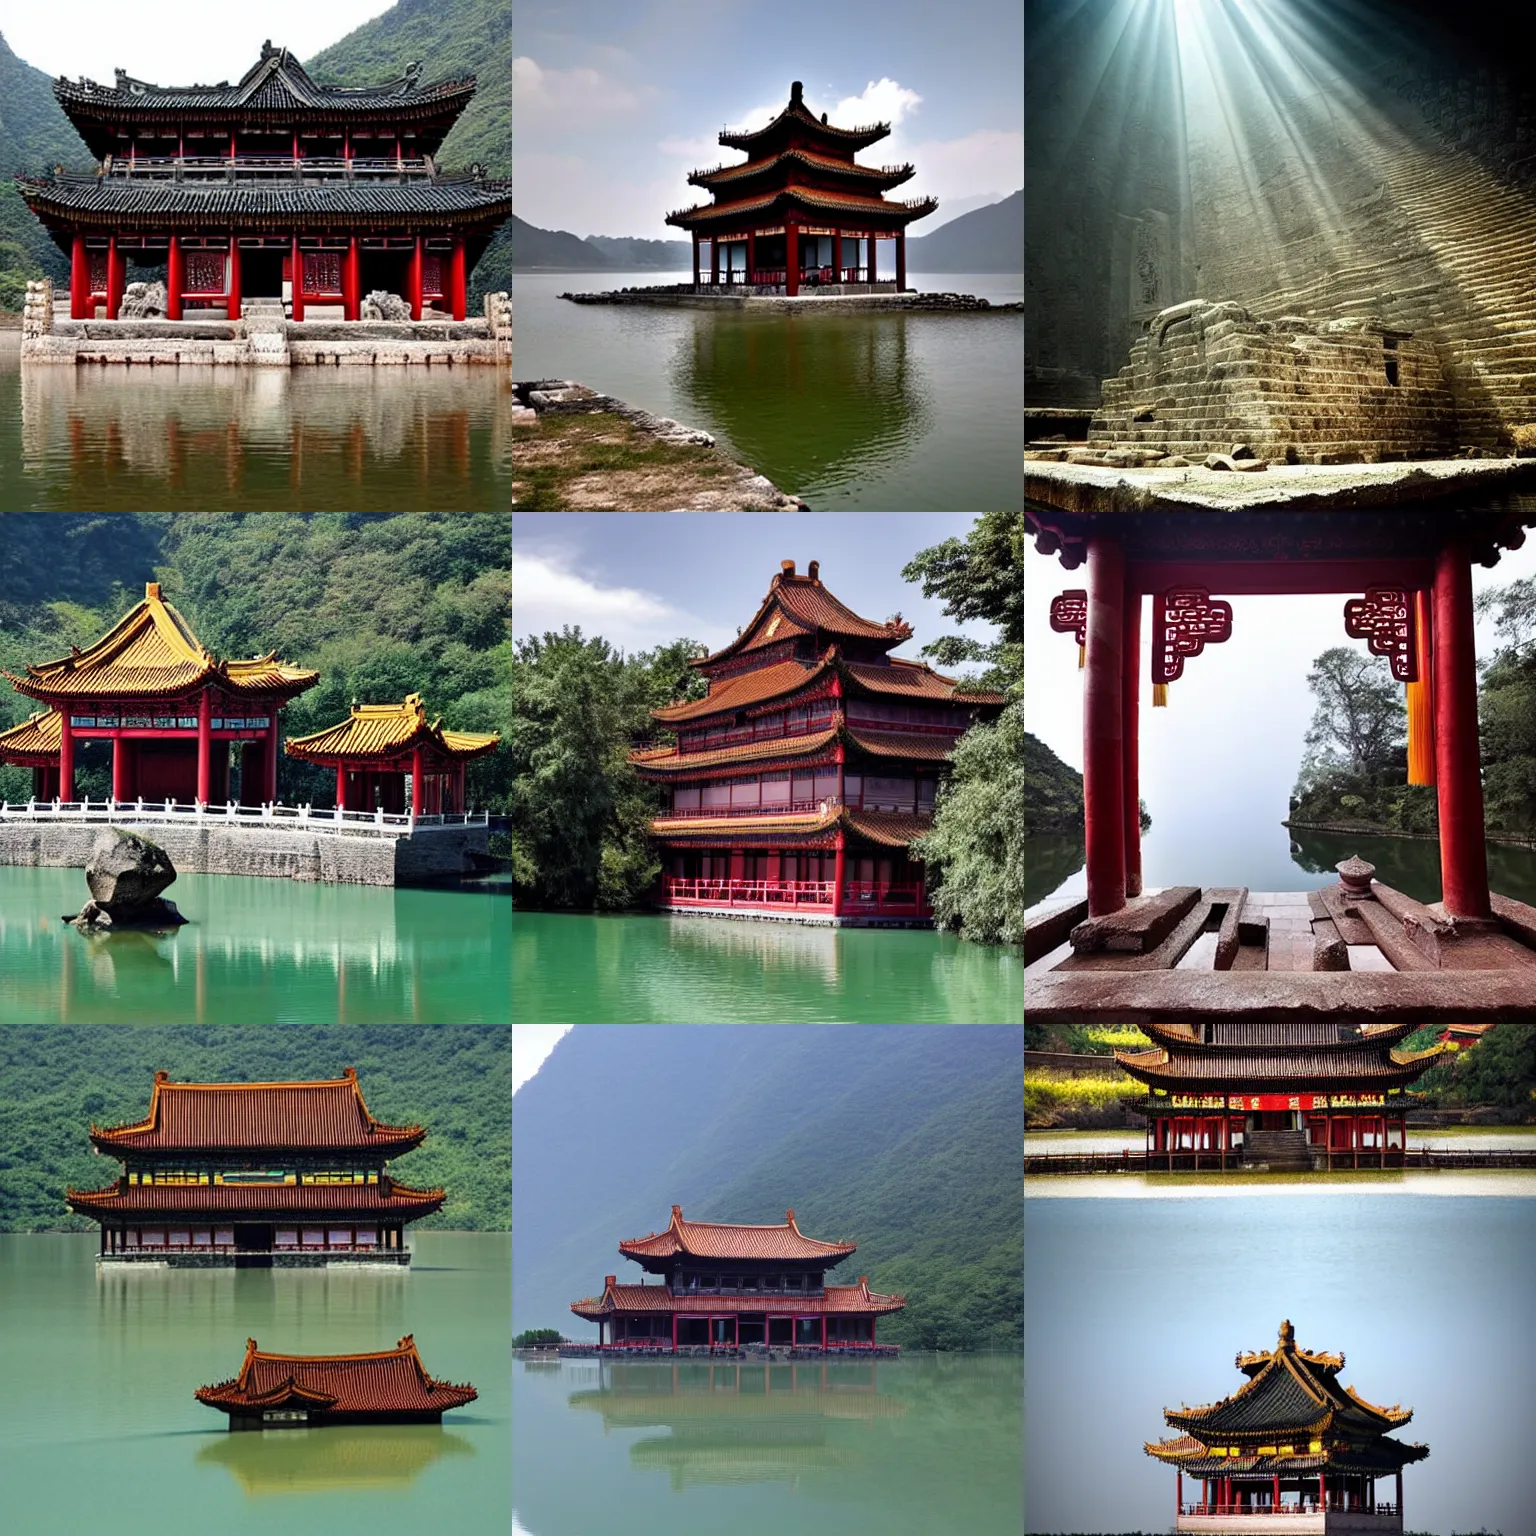 Prompt: There is an ancient Chinese-style building that has been sleeping for thousands of years at the bottom of the huge lake. A ray of light shines from the lake surface, illuminating the ancient building at the bottom of the lake.